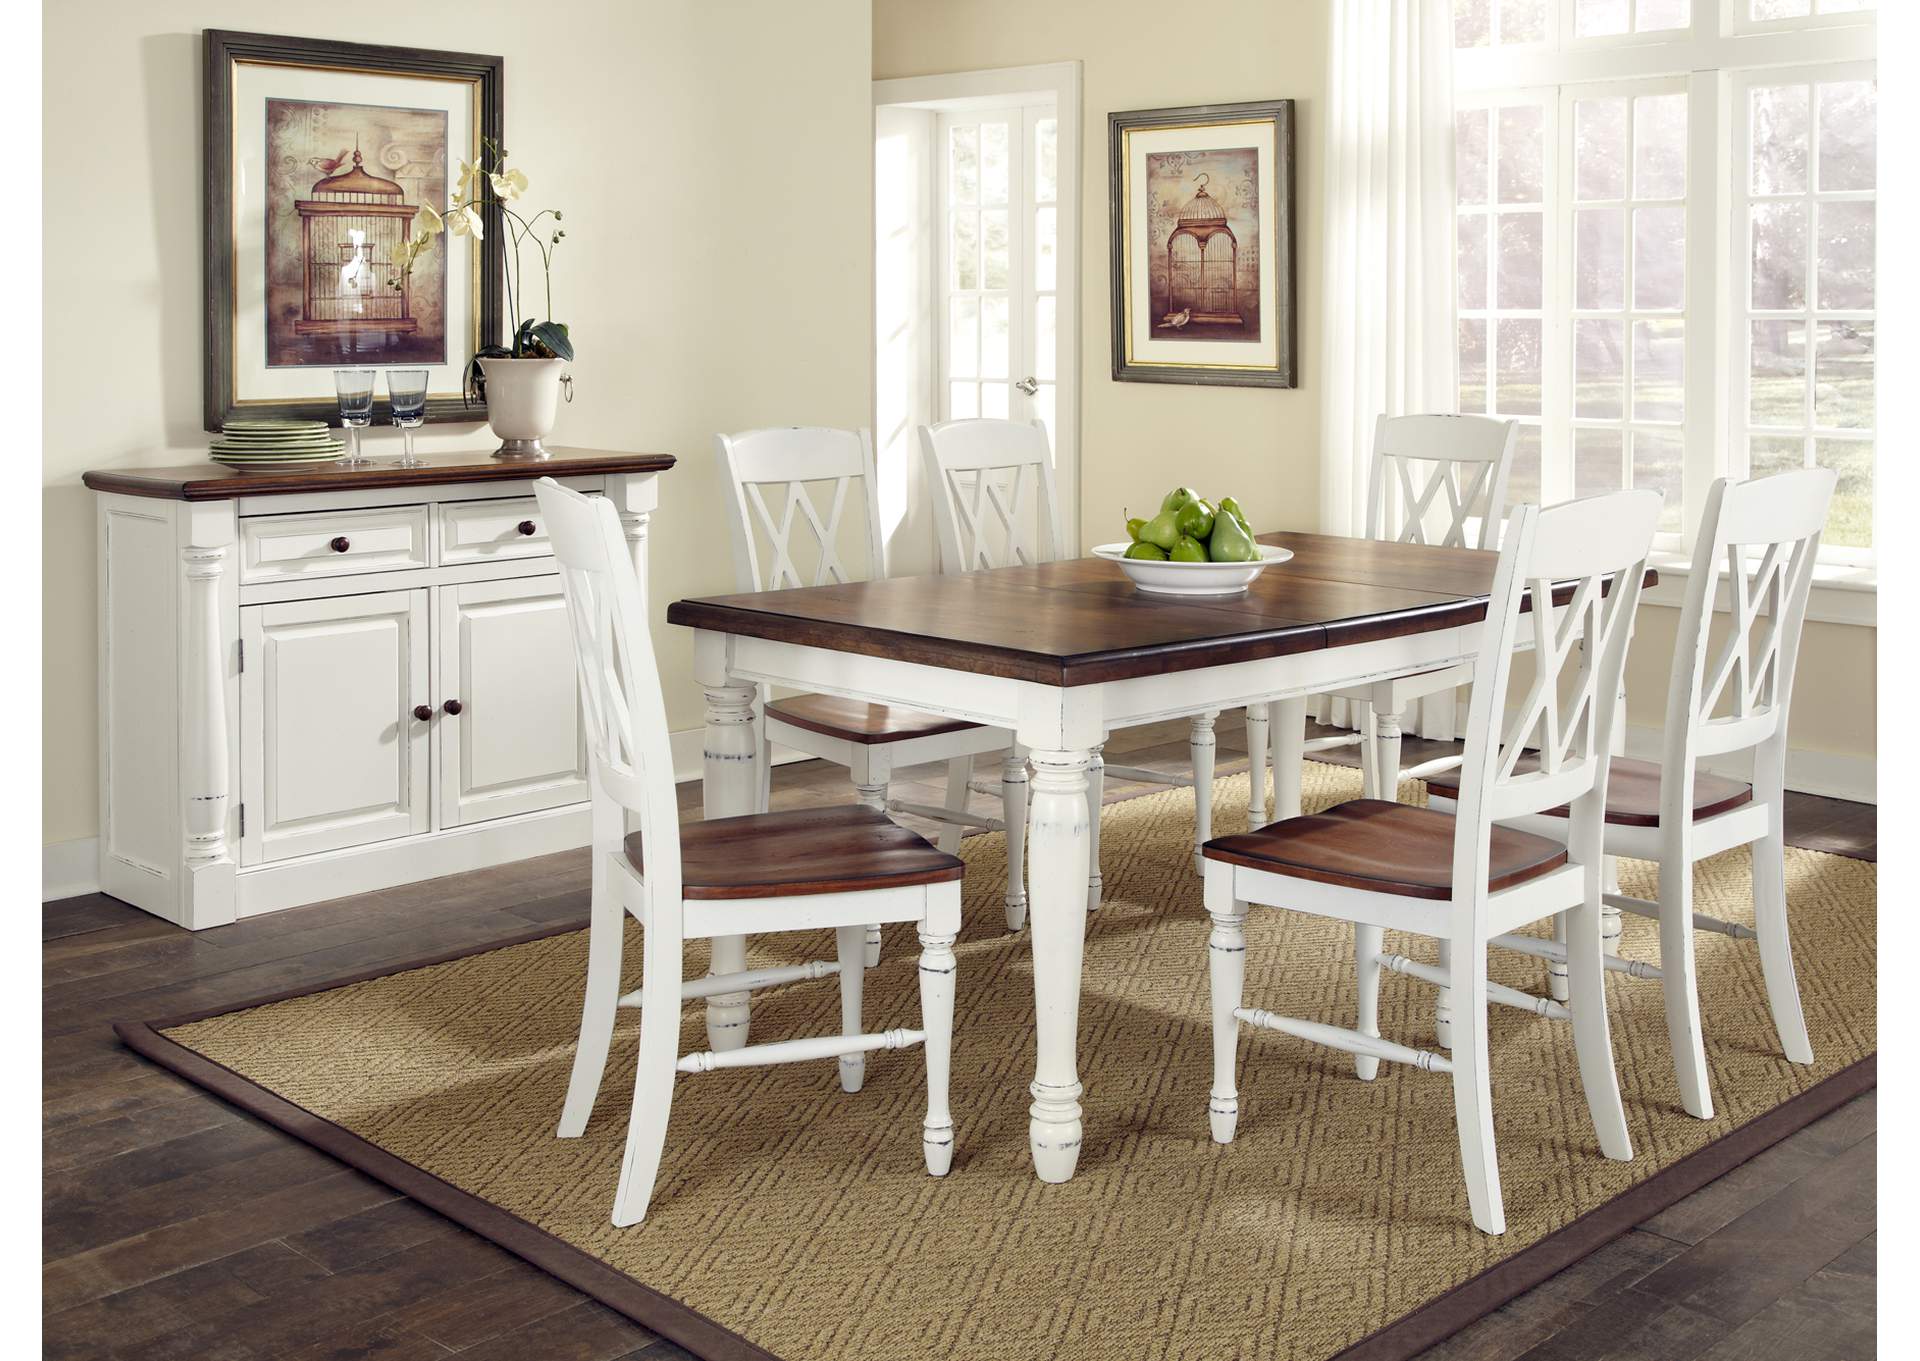 Monarch Off-White 7 Piece Dining Set,Homestyles